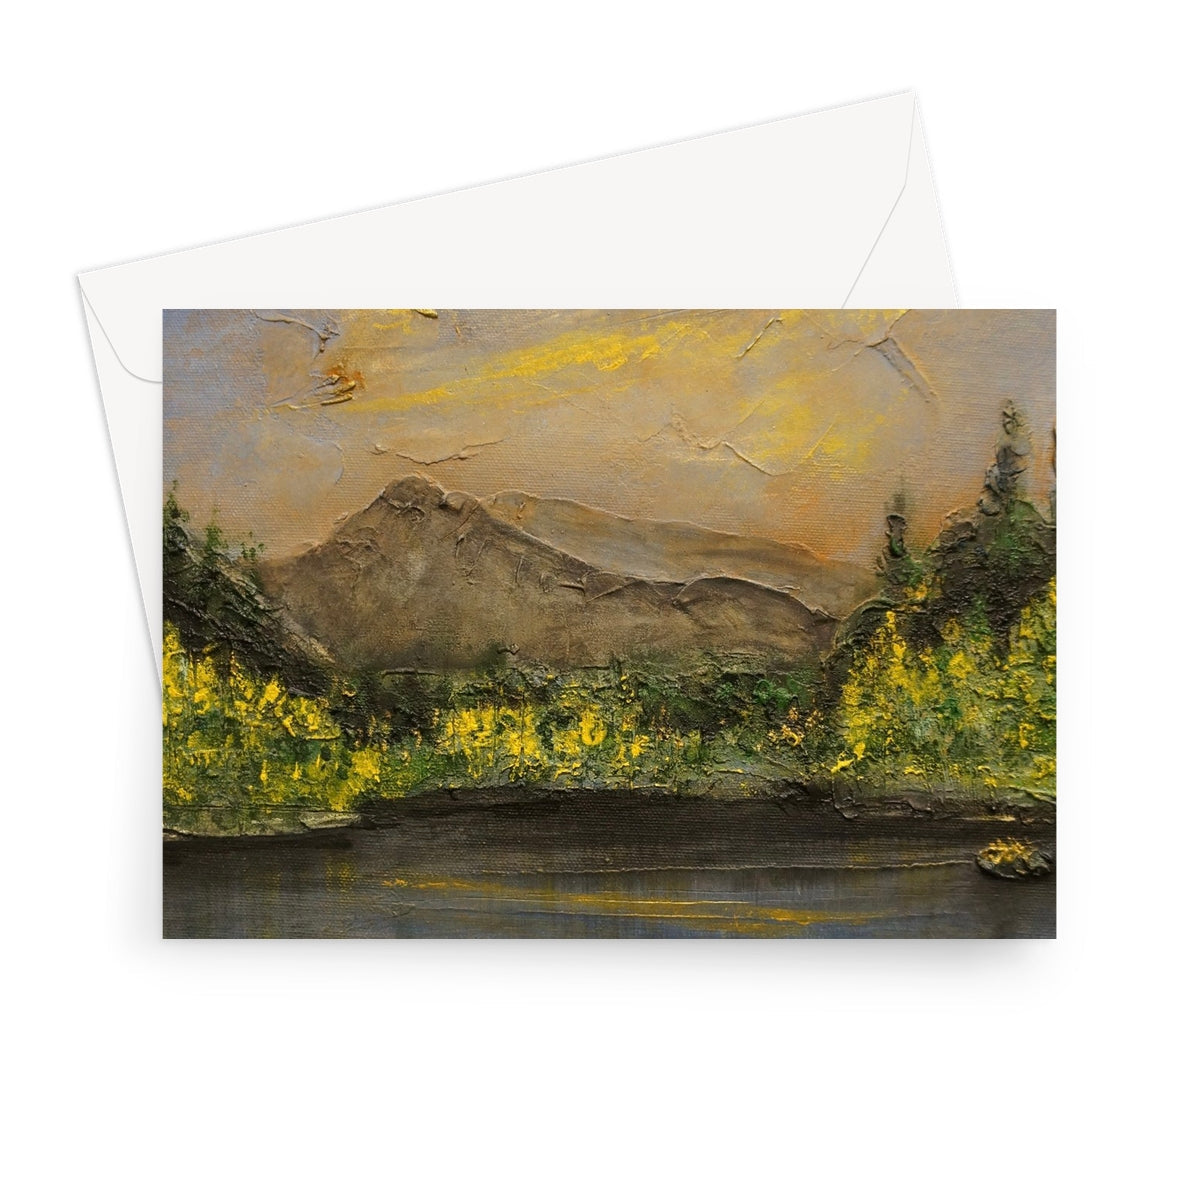 Glencoe Lochan Dusk Art Gifts Greeting Card-Greetings Cards-Scottish Lochs & Mountains Art Gallery-7"x5"-1 Card-Paintings, Prints, Homeware, Art Gifts From Scotland By Scottish Artist Kevin Hunter